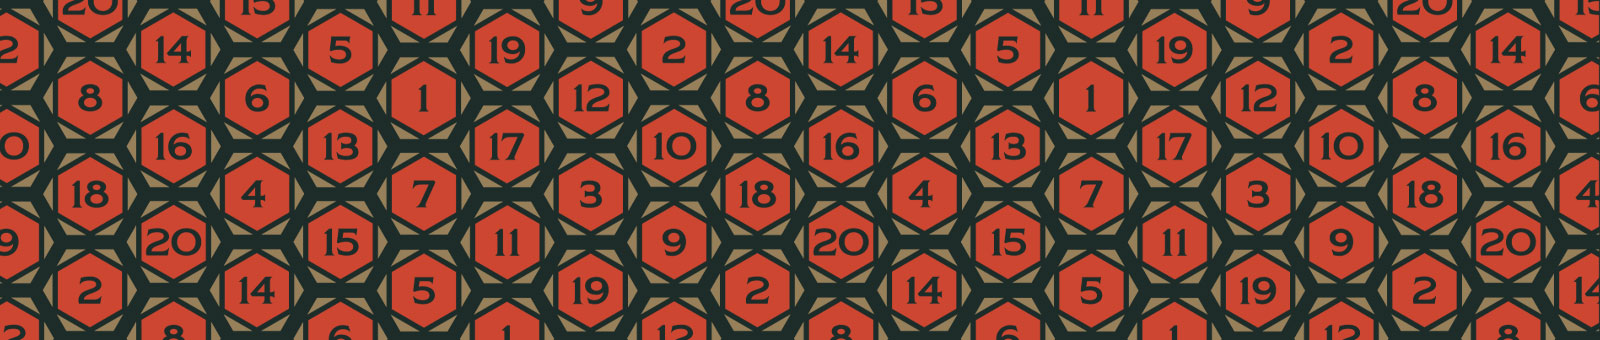 pattern made of hexagons with various numbers in them